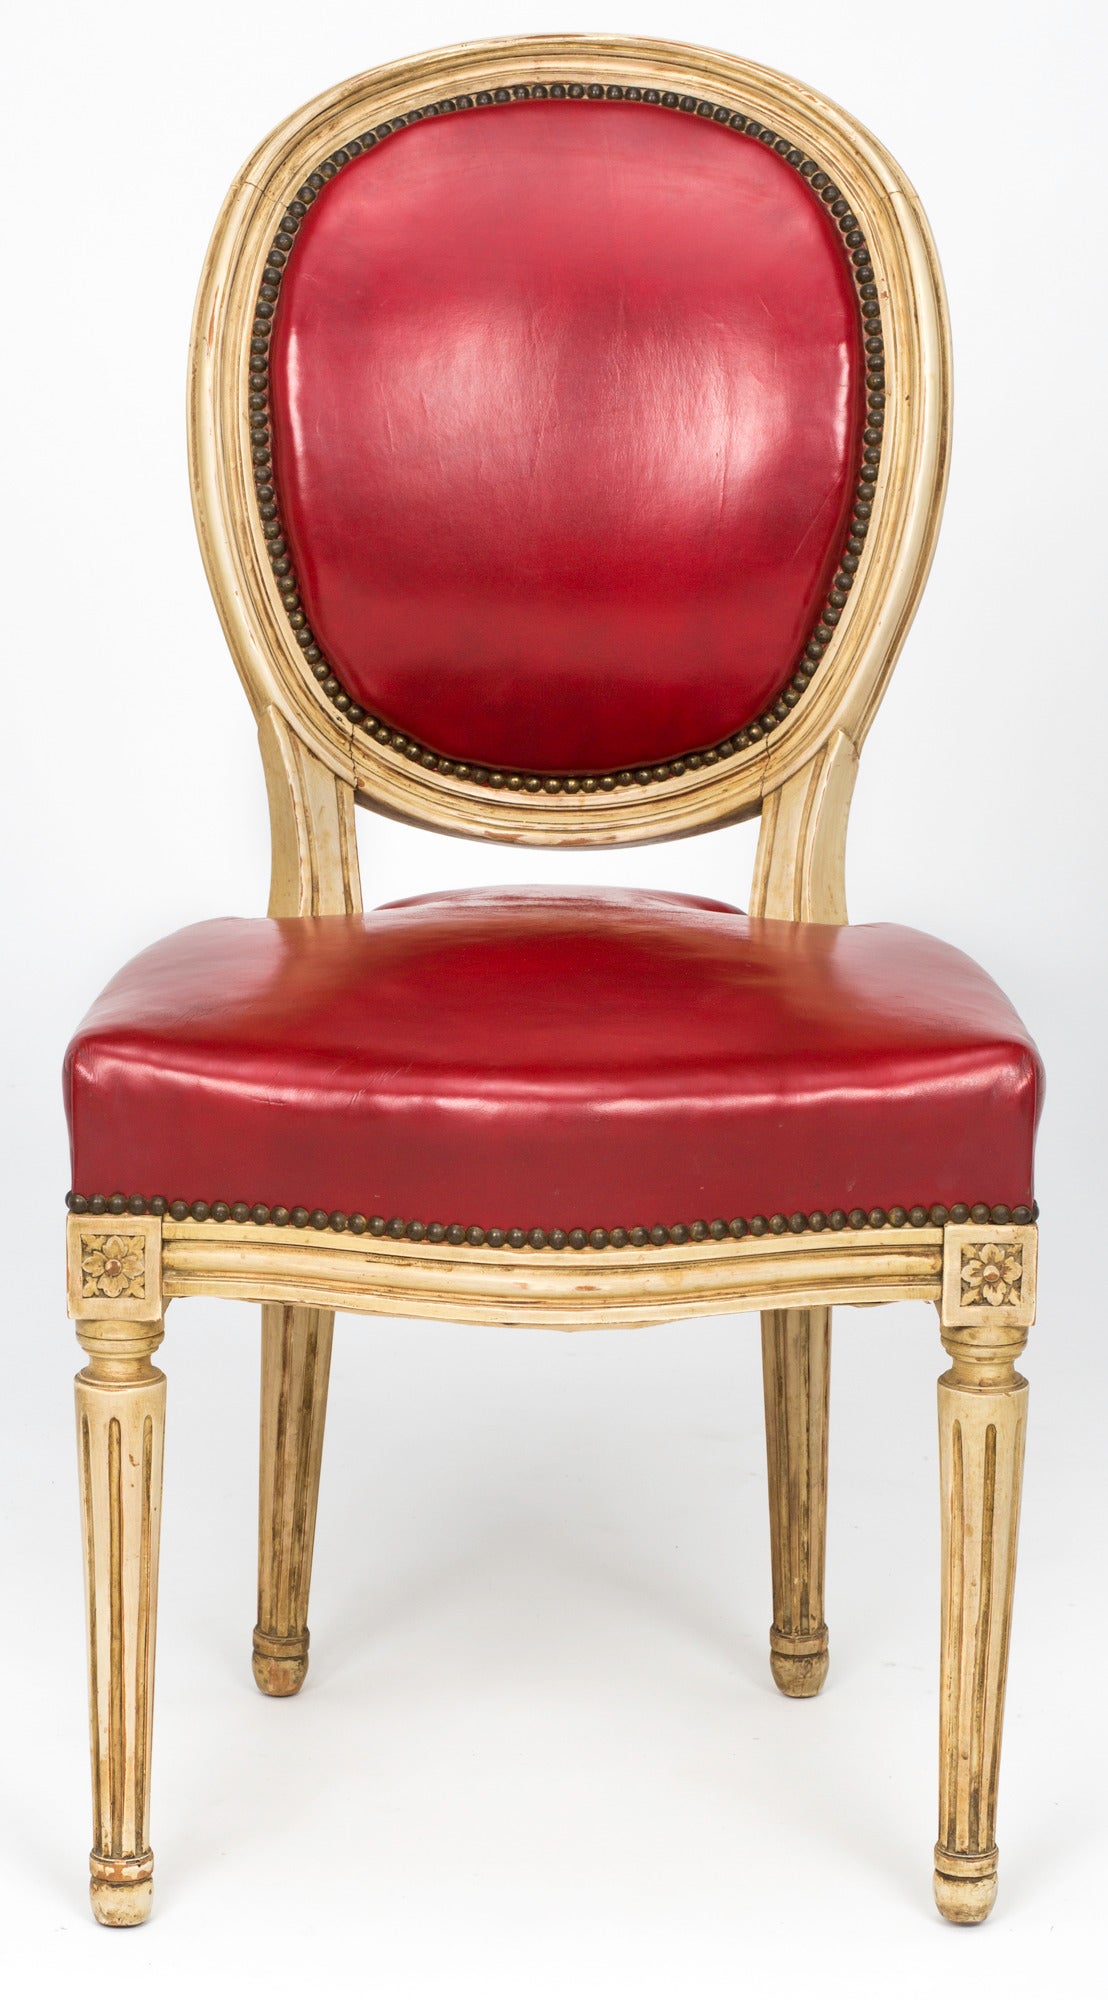 Pair of French Louis XVI style chairs in antique cream painted finish. Frames are from 1880s. Later upholstered in clean bright red leather. Finished with decorative brass nail studs. Great accent chairs or desk chair.